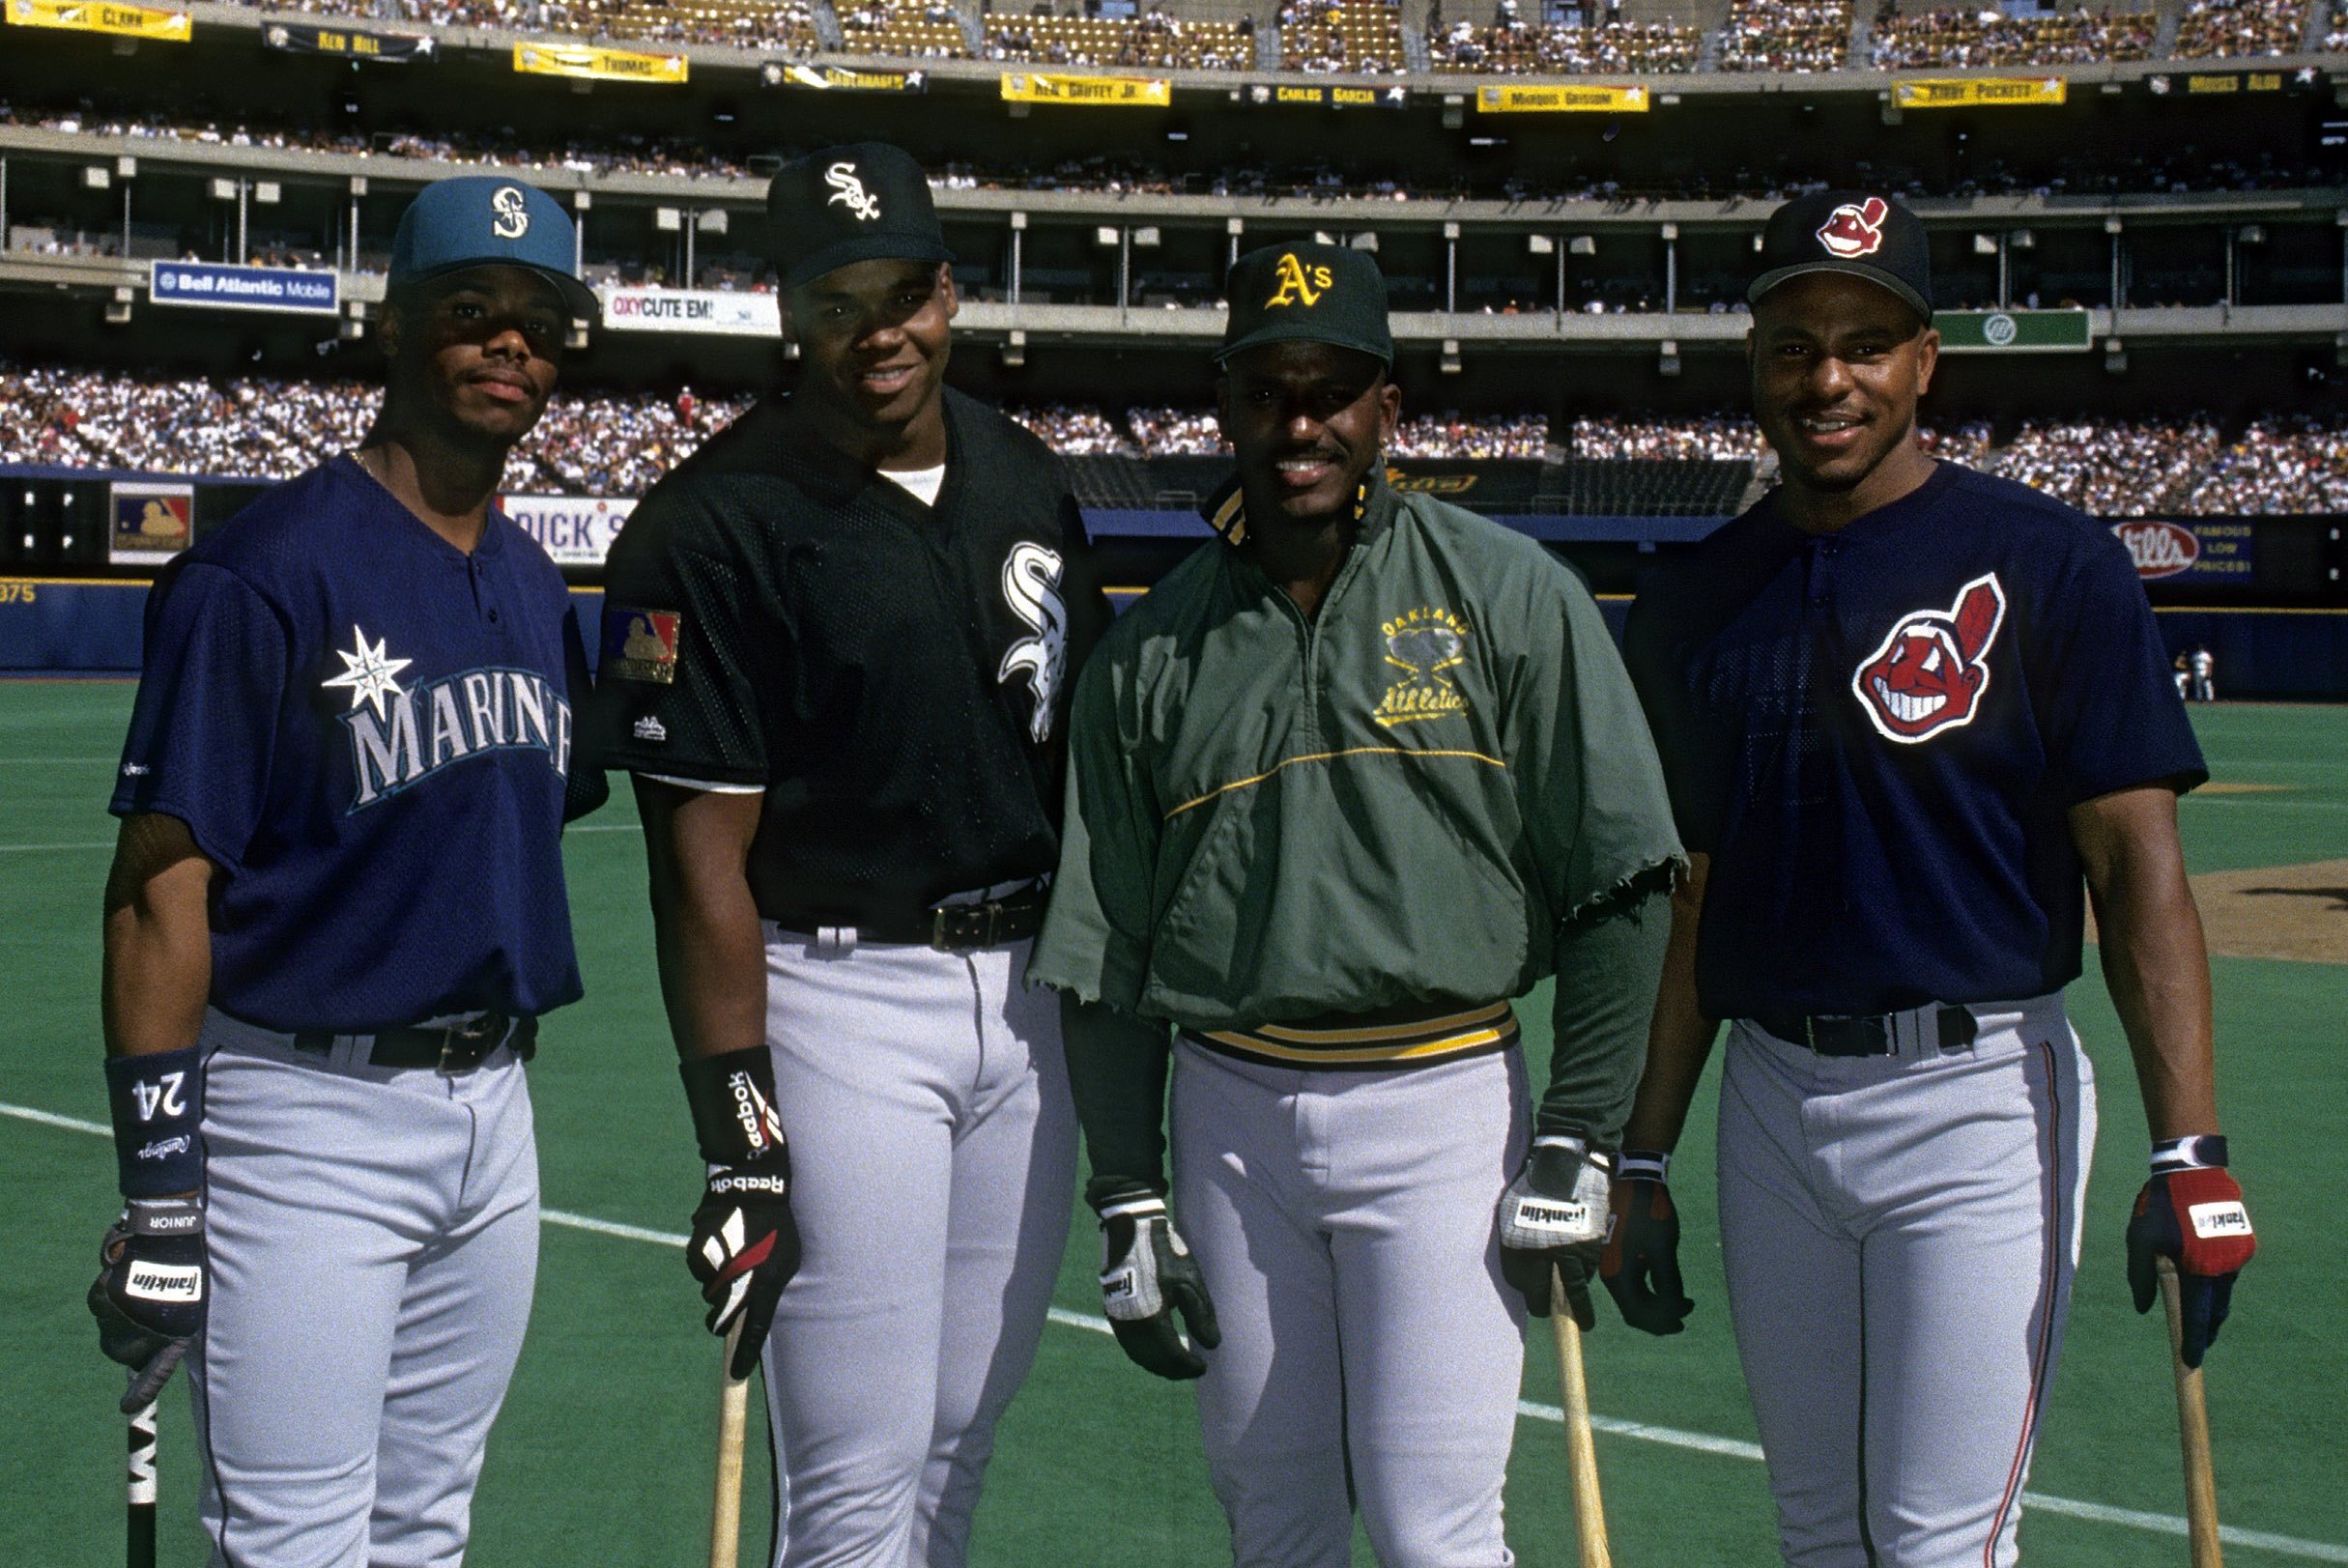 Deion Sanders' Last Great Moment in MLB - Legends On Deck